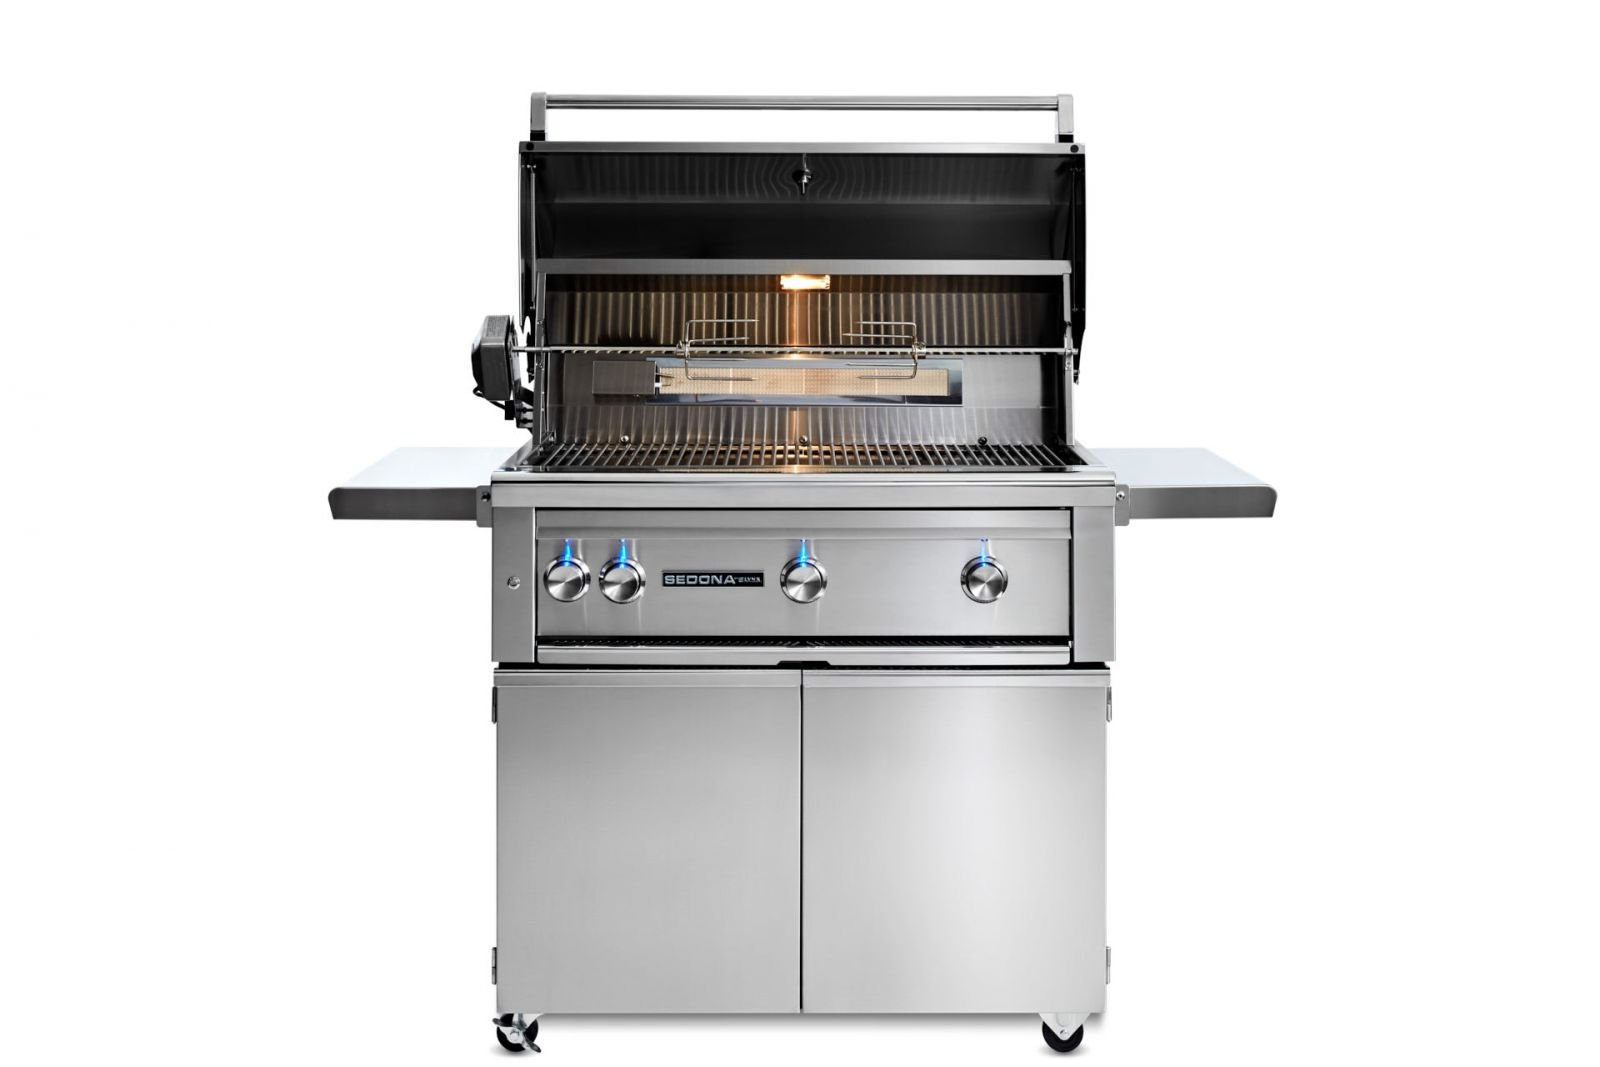 36" Freestanding Grill with 1 Prosear Infrared Burner and 2 Stainless Steel Burners and Rotisserie (L600PSFR)